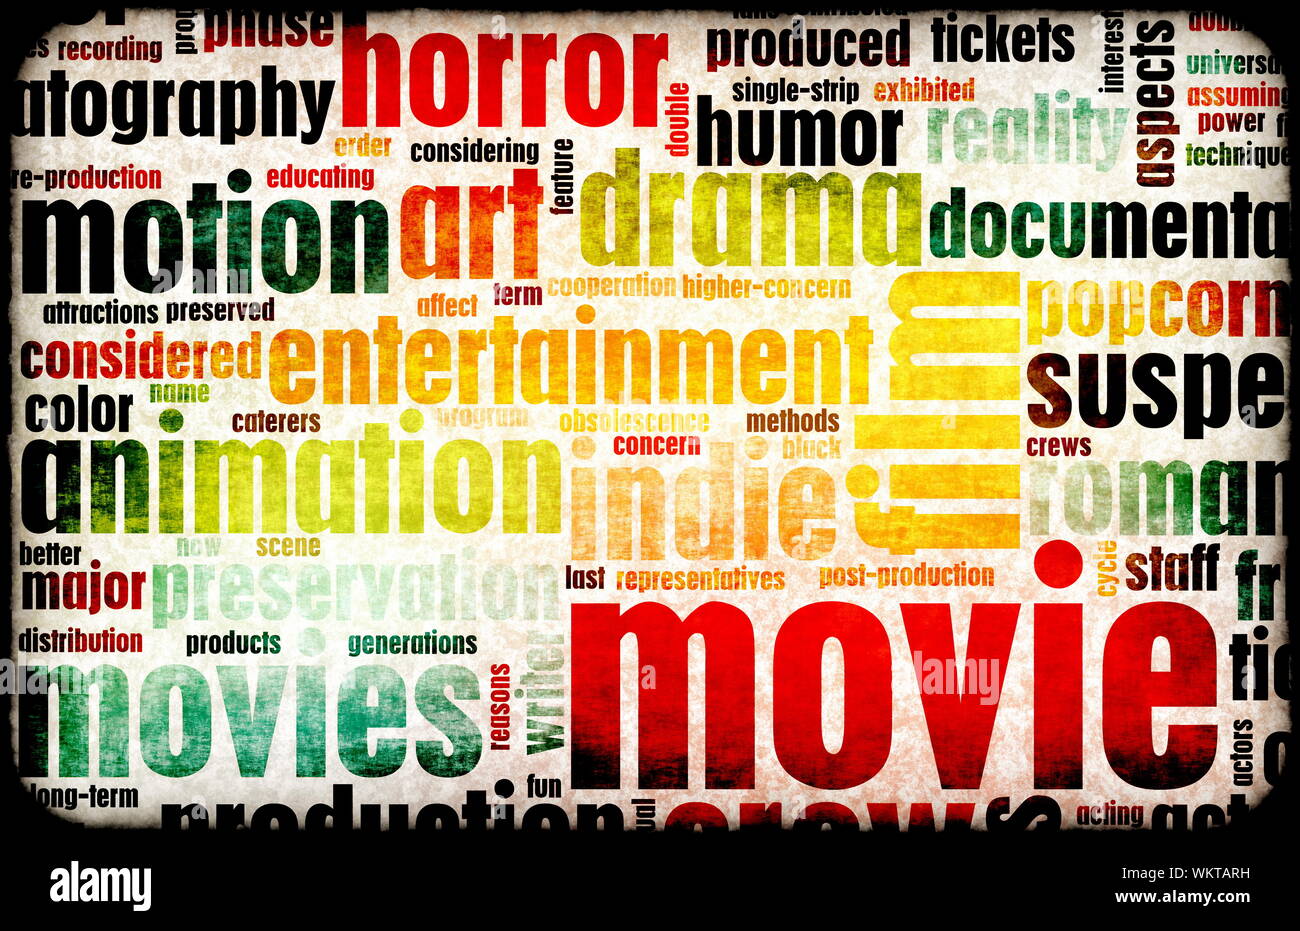 Movie Poster of Film Genres Vintage Background Stock Photo